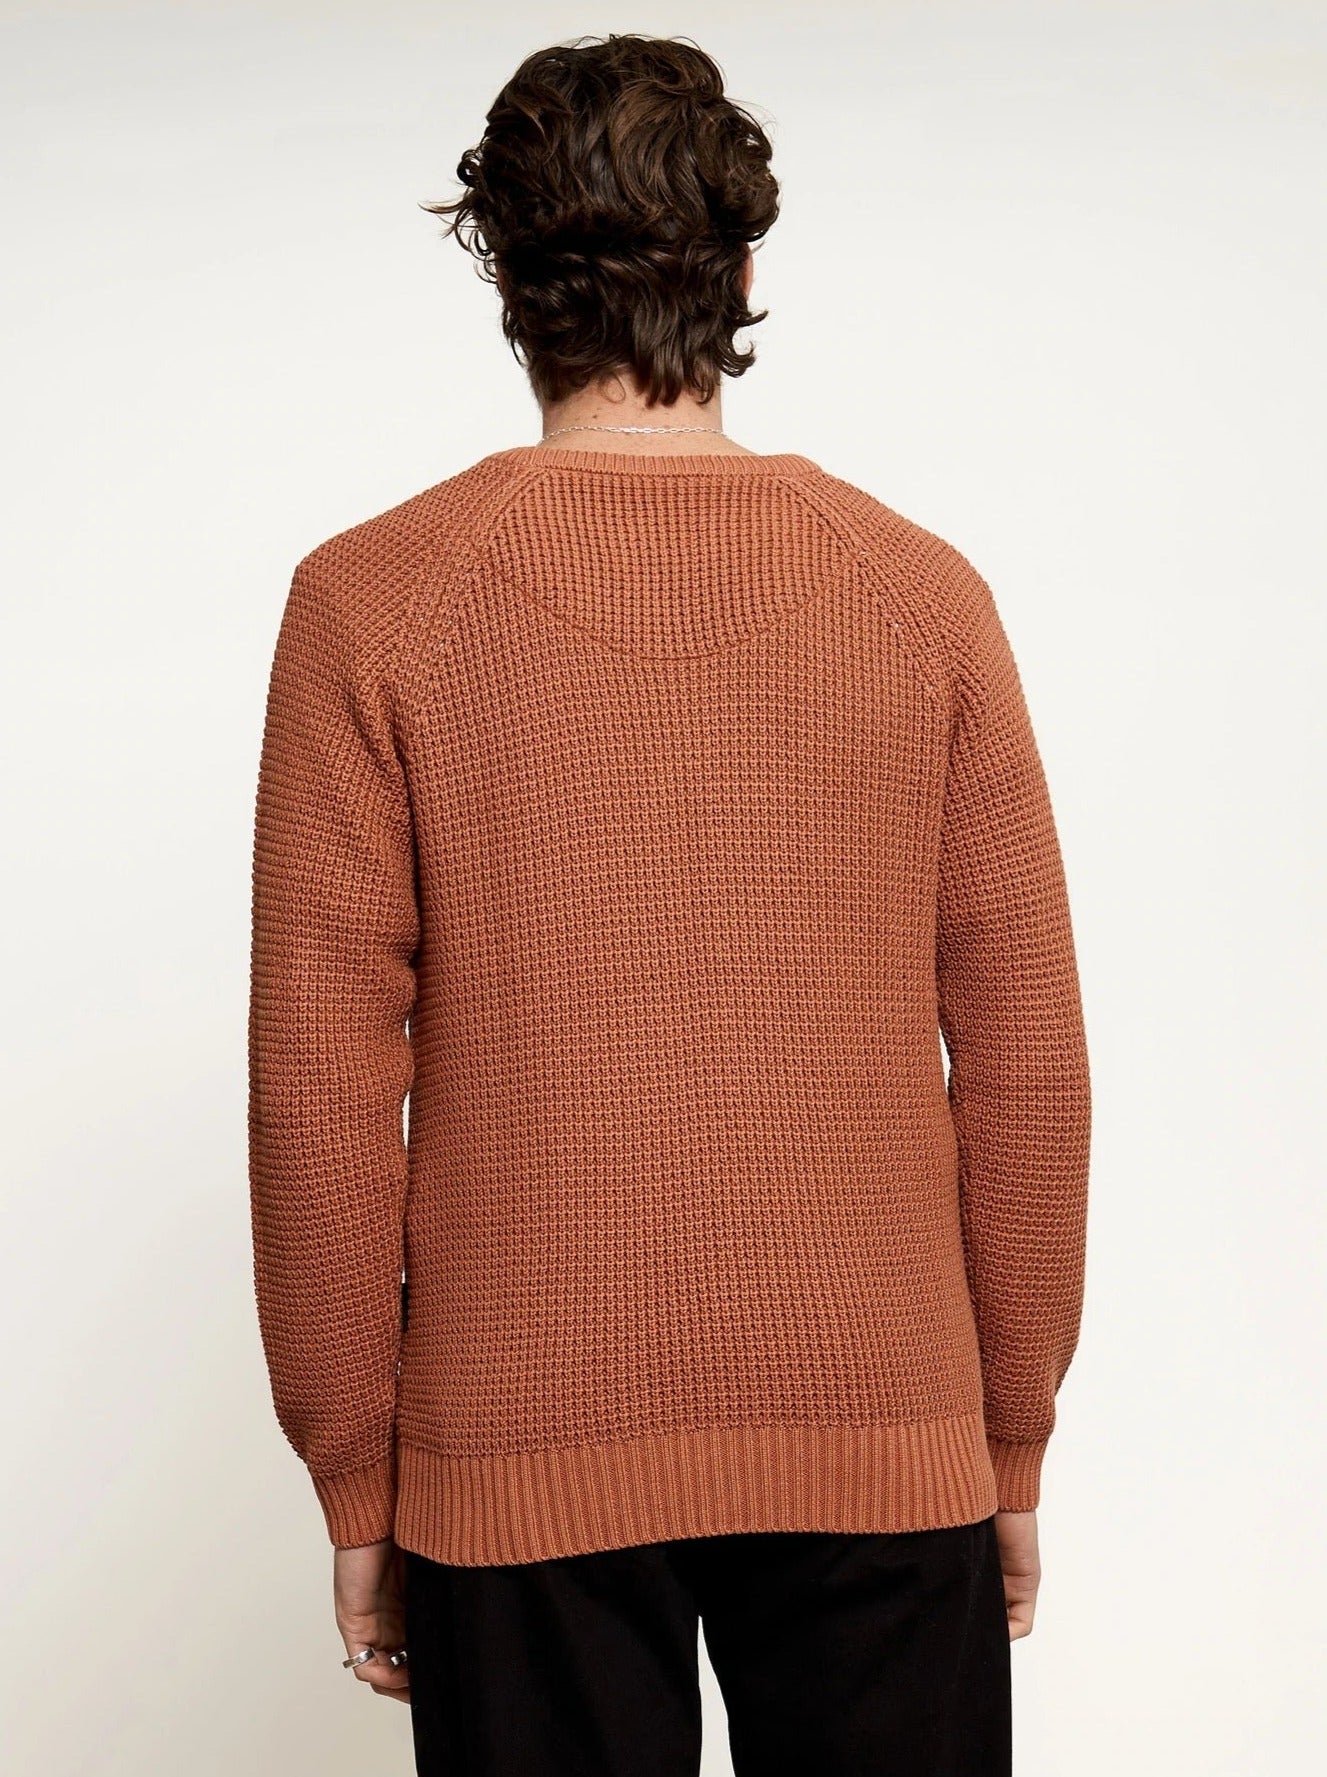 Mr Simple - Chunky Knit - Rust